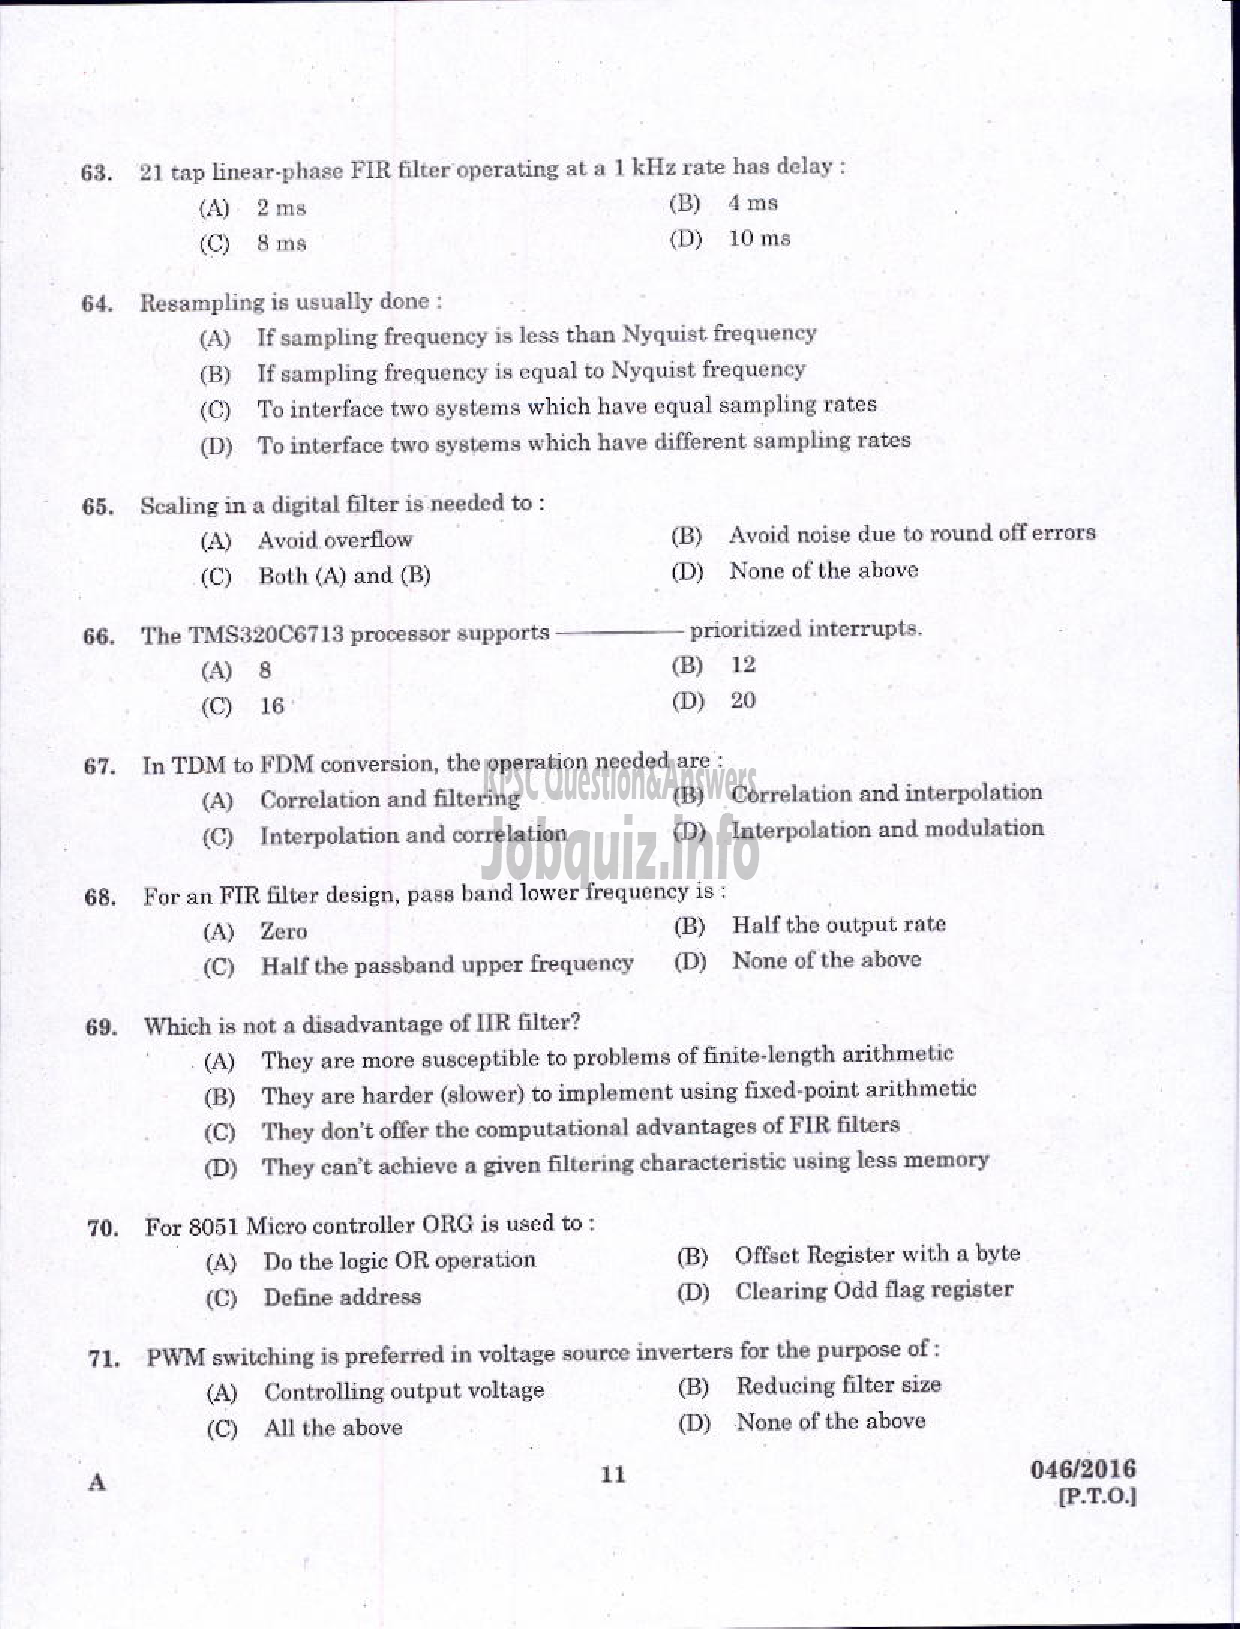 Kerala PSC Question Paper - VOCATIONAL TEACHER MAINTENANCE AND REPAIRS OF RADIO AND TELEVISION-9